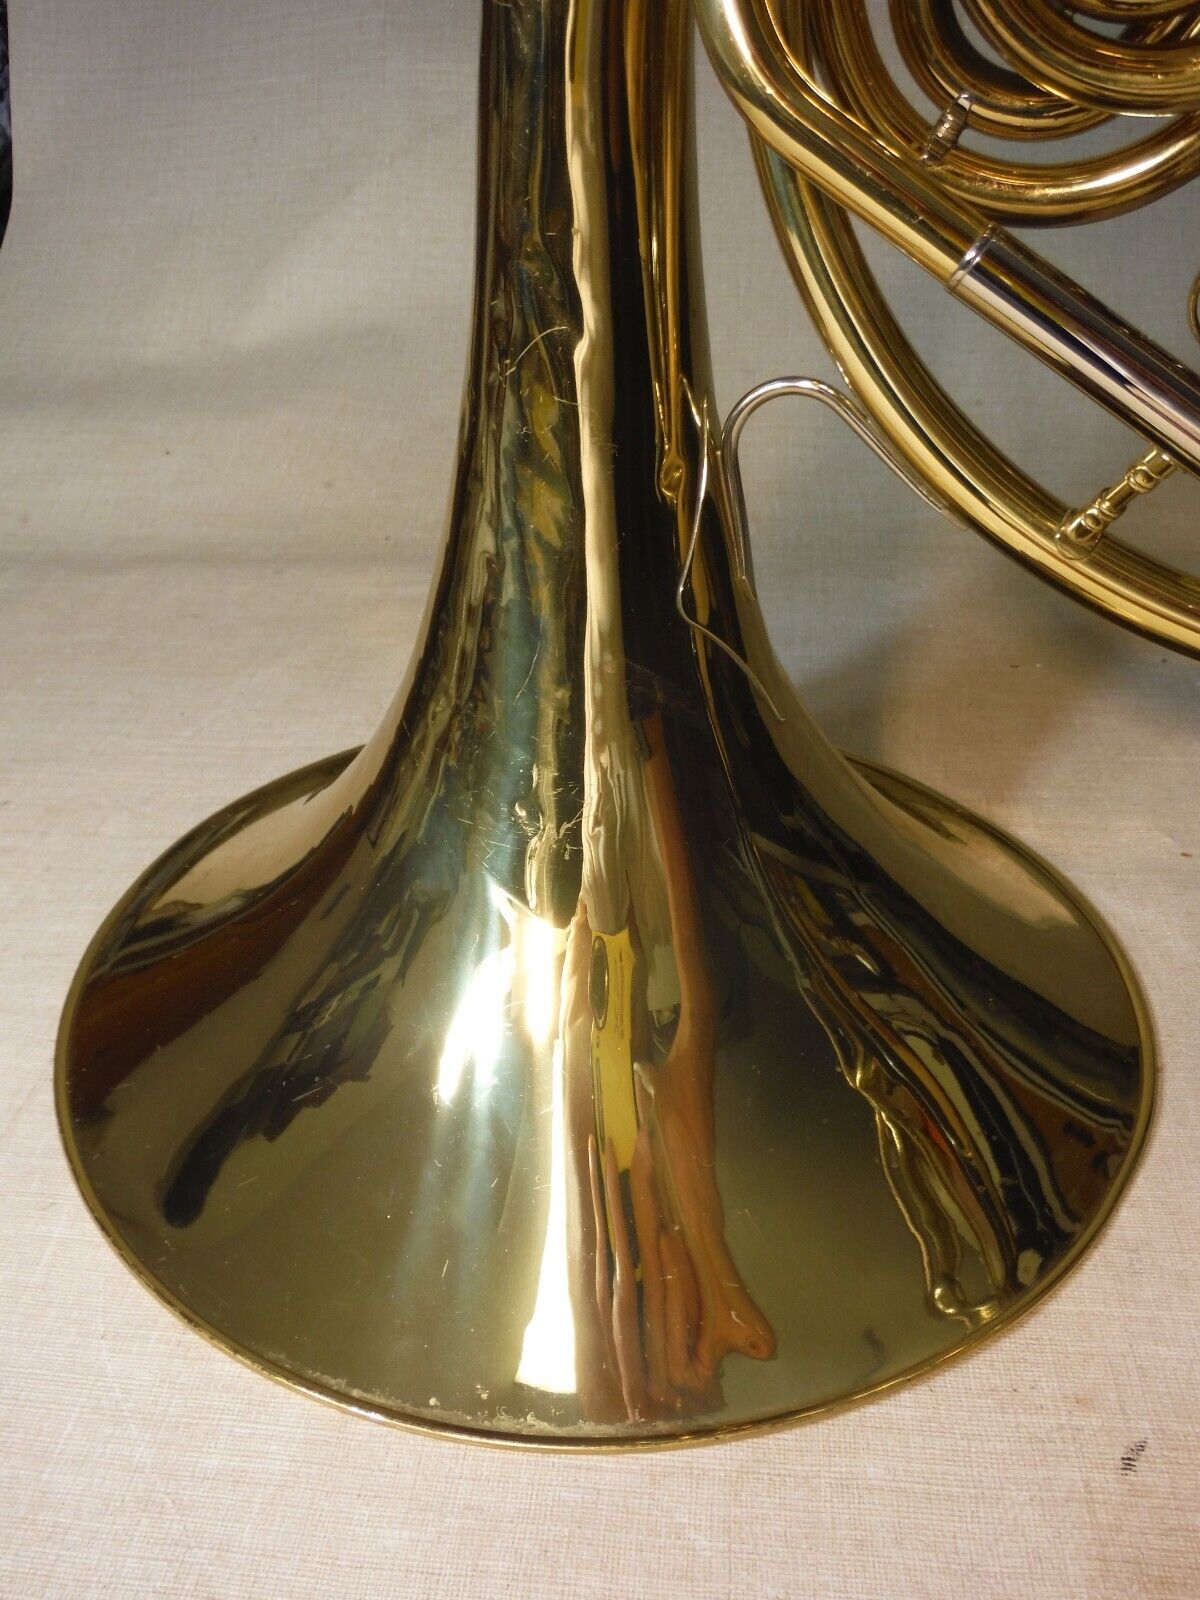 JUPITER JHR-852 DOUBLE FRENCH HORN BRASS WORKING GOOD W/DENTS CASE MOUTHPIECE 17